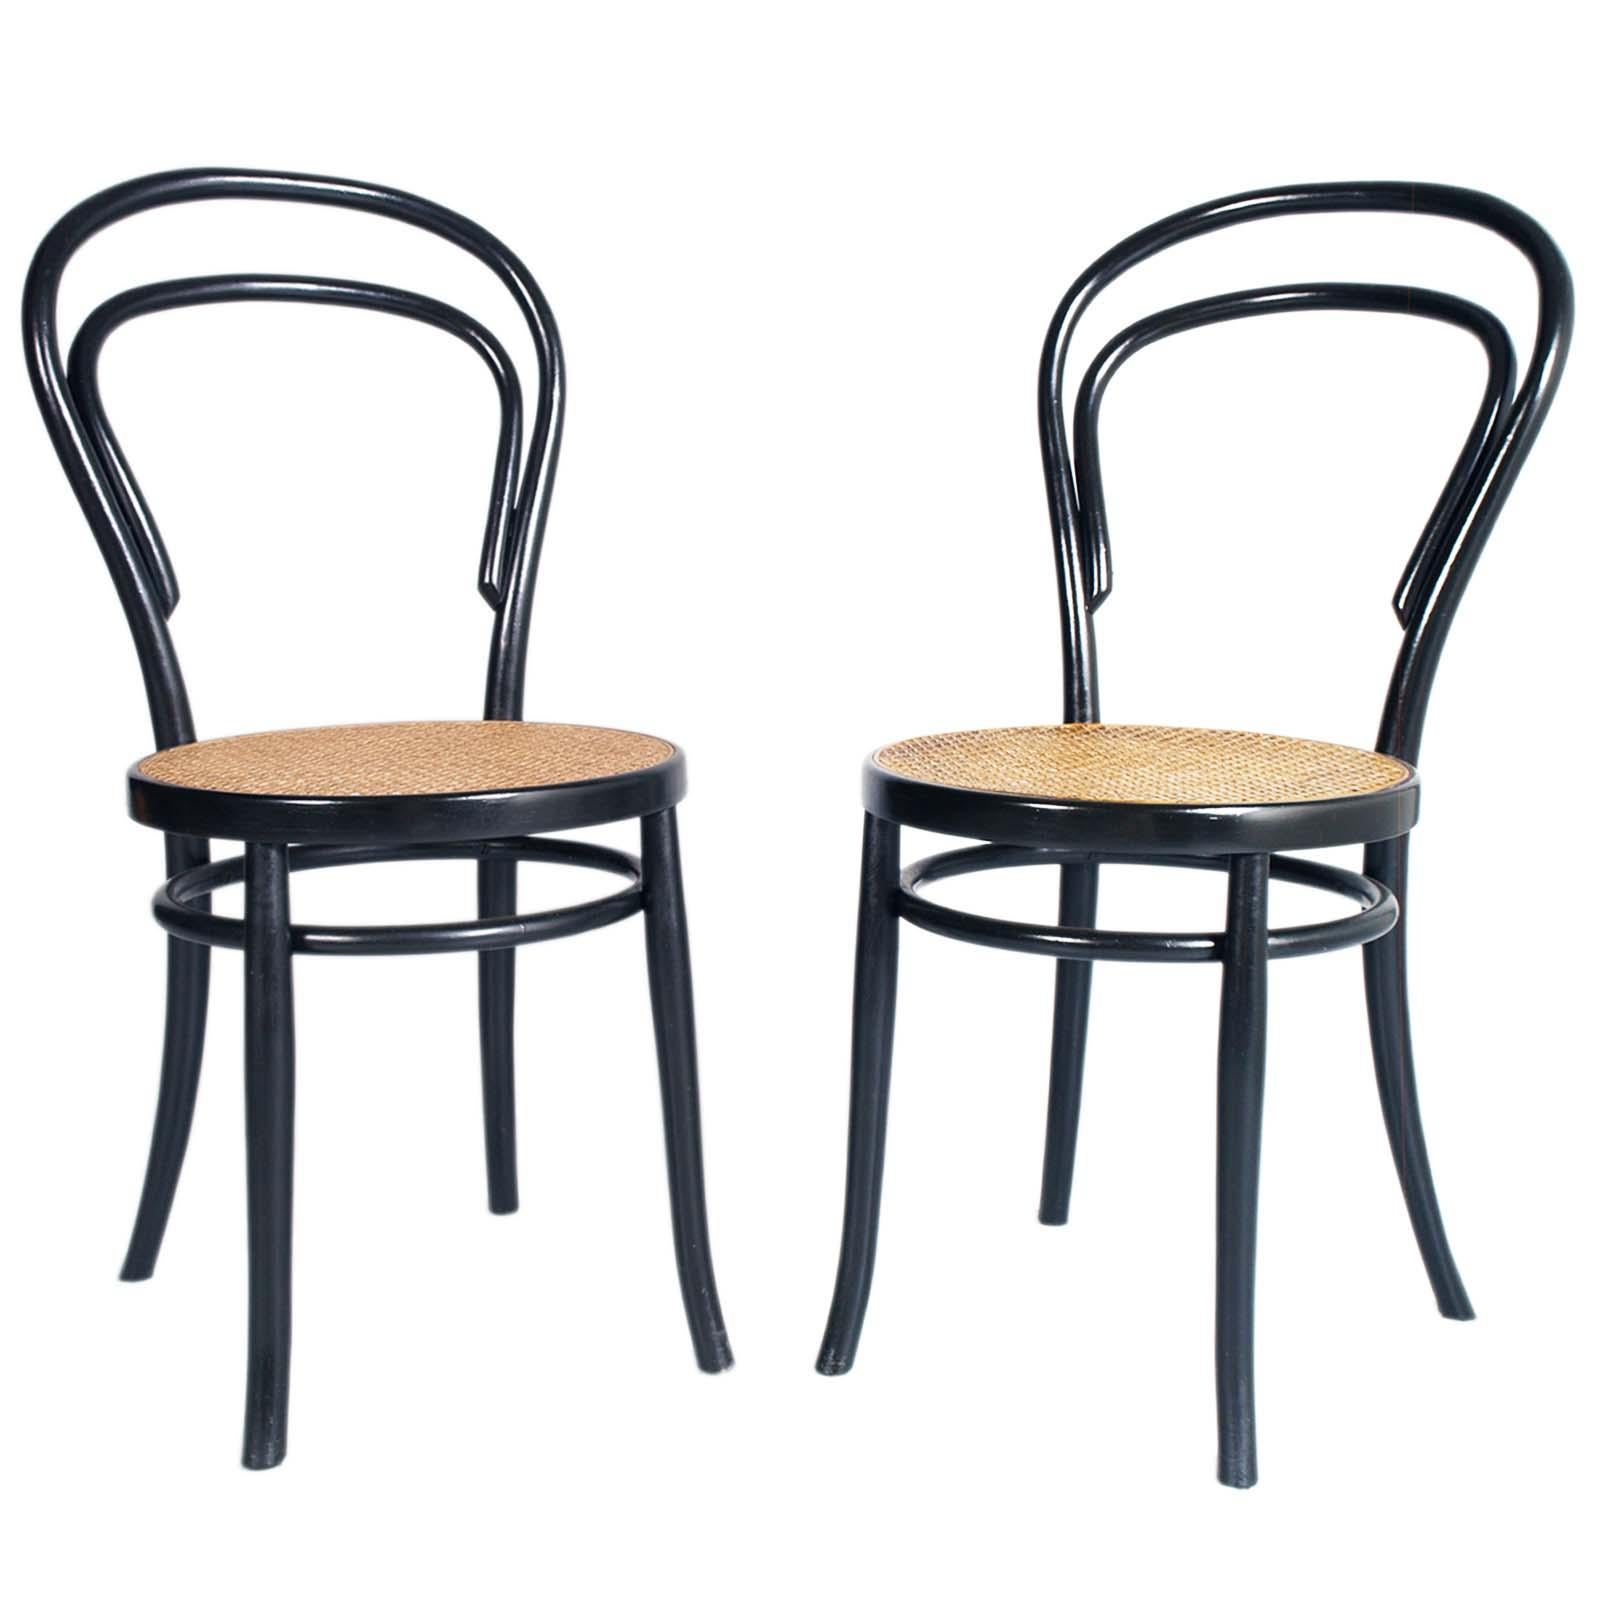 Early 20th century set four Thonet chairs by Sautto & Liberale, ebonized in curved beech.

Naples is a capital of the Thonet style in an Italian version with a beautiful story to tell.
Sautto e Liberale is the most important company. Born from the